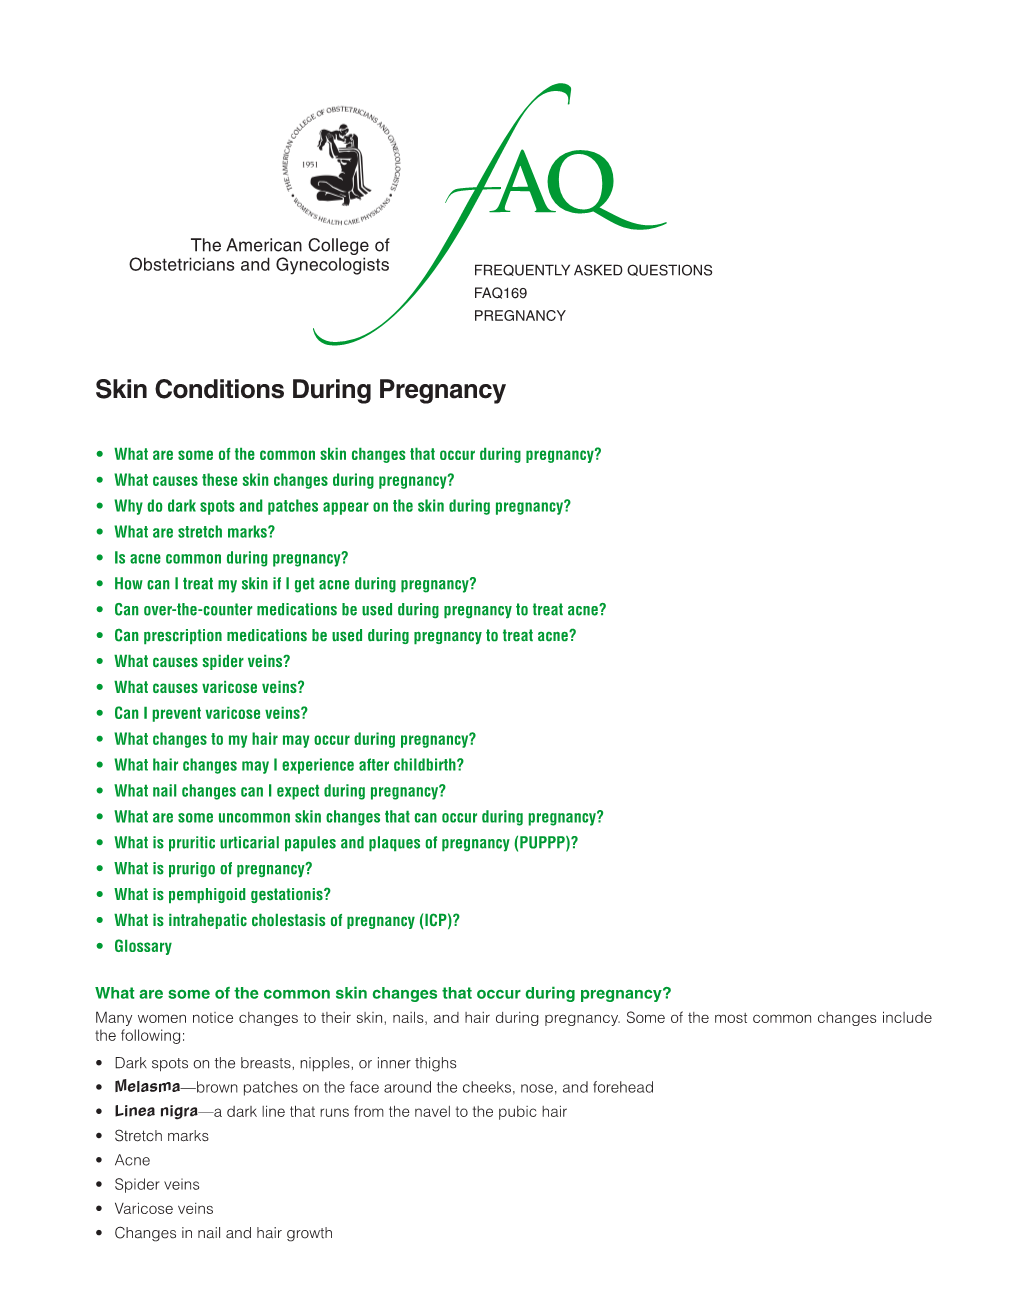 FAQ 169 -- Skin Conditions During Pregnancy